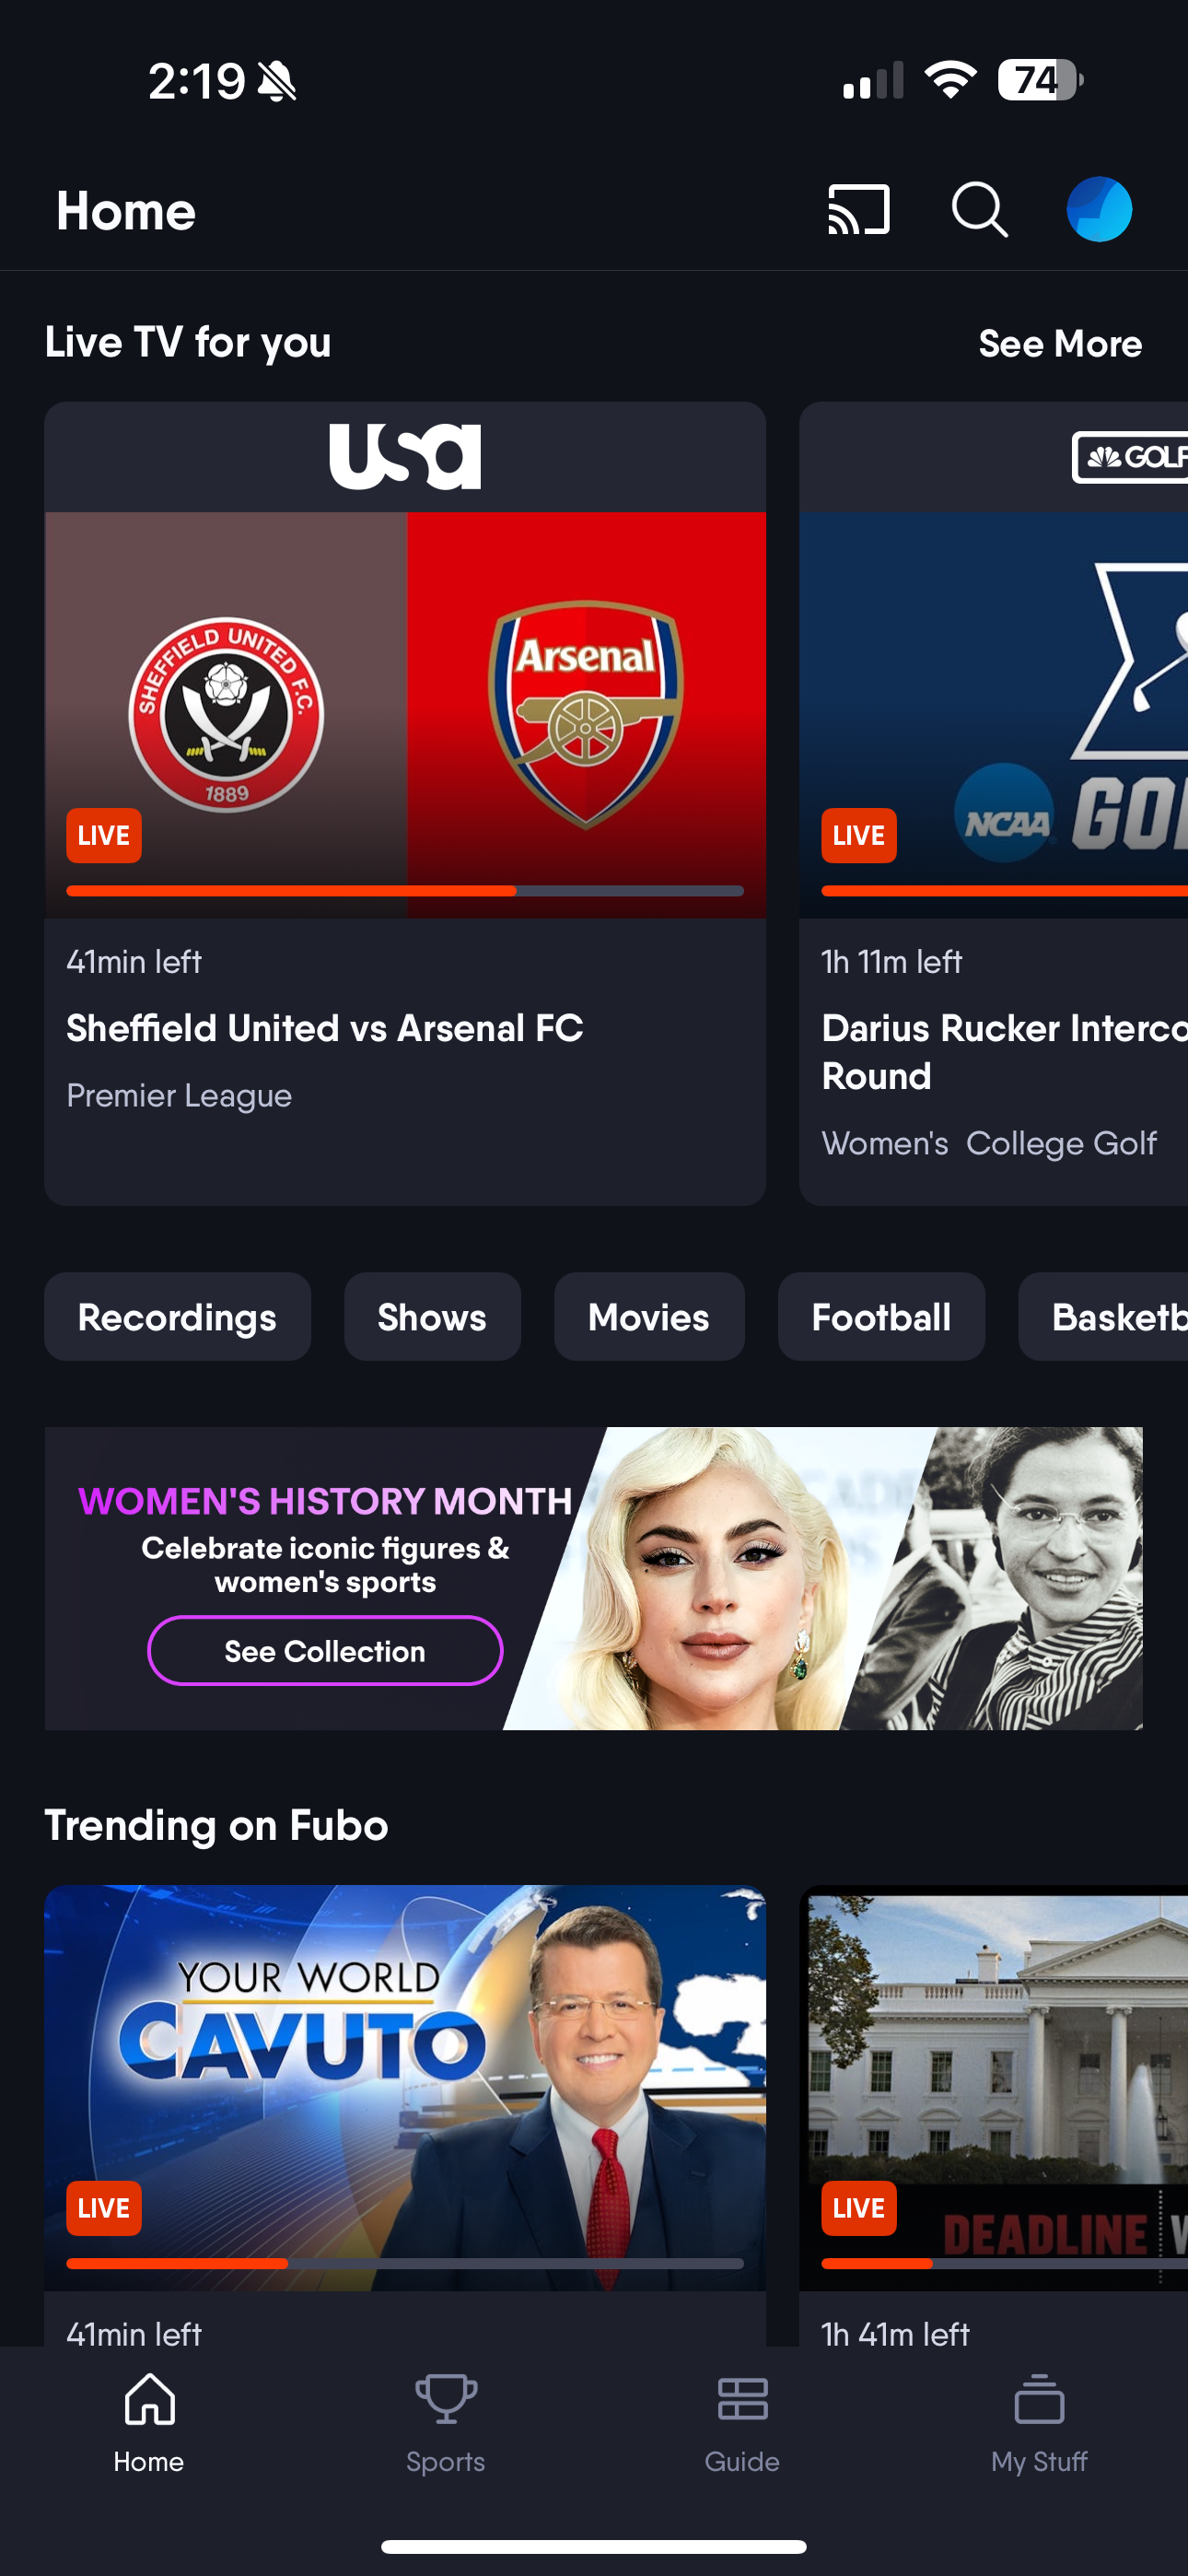 The HOME screen of the FuboTV app on an iOS device